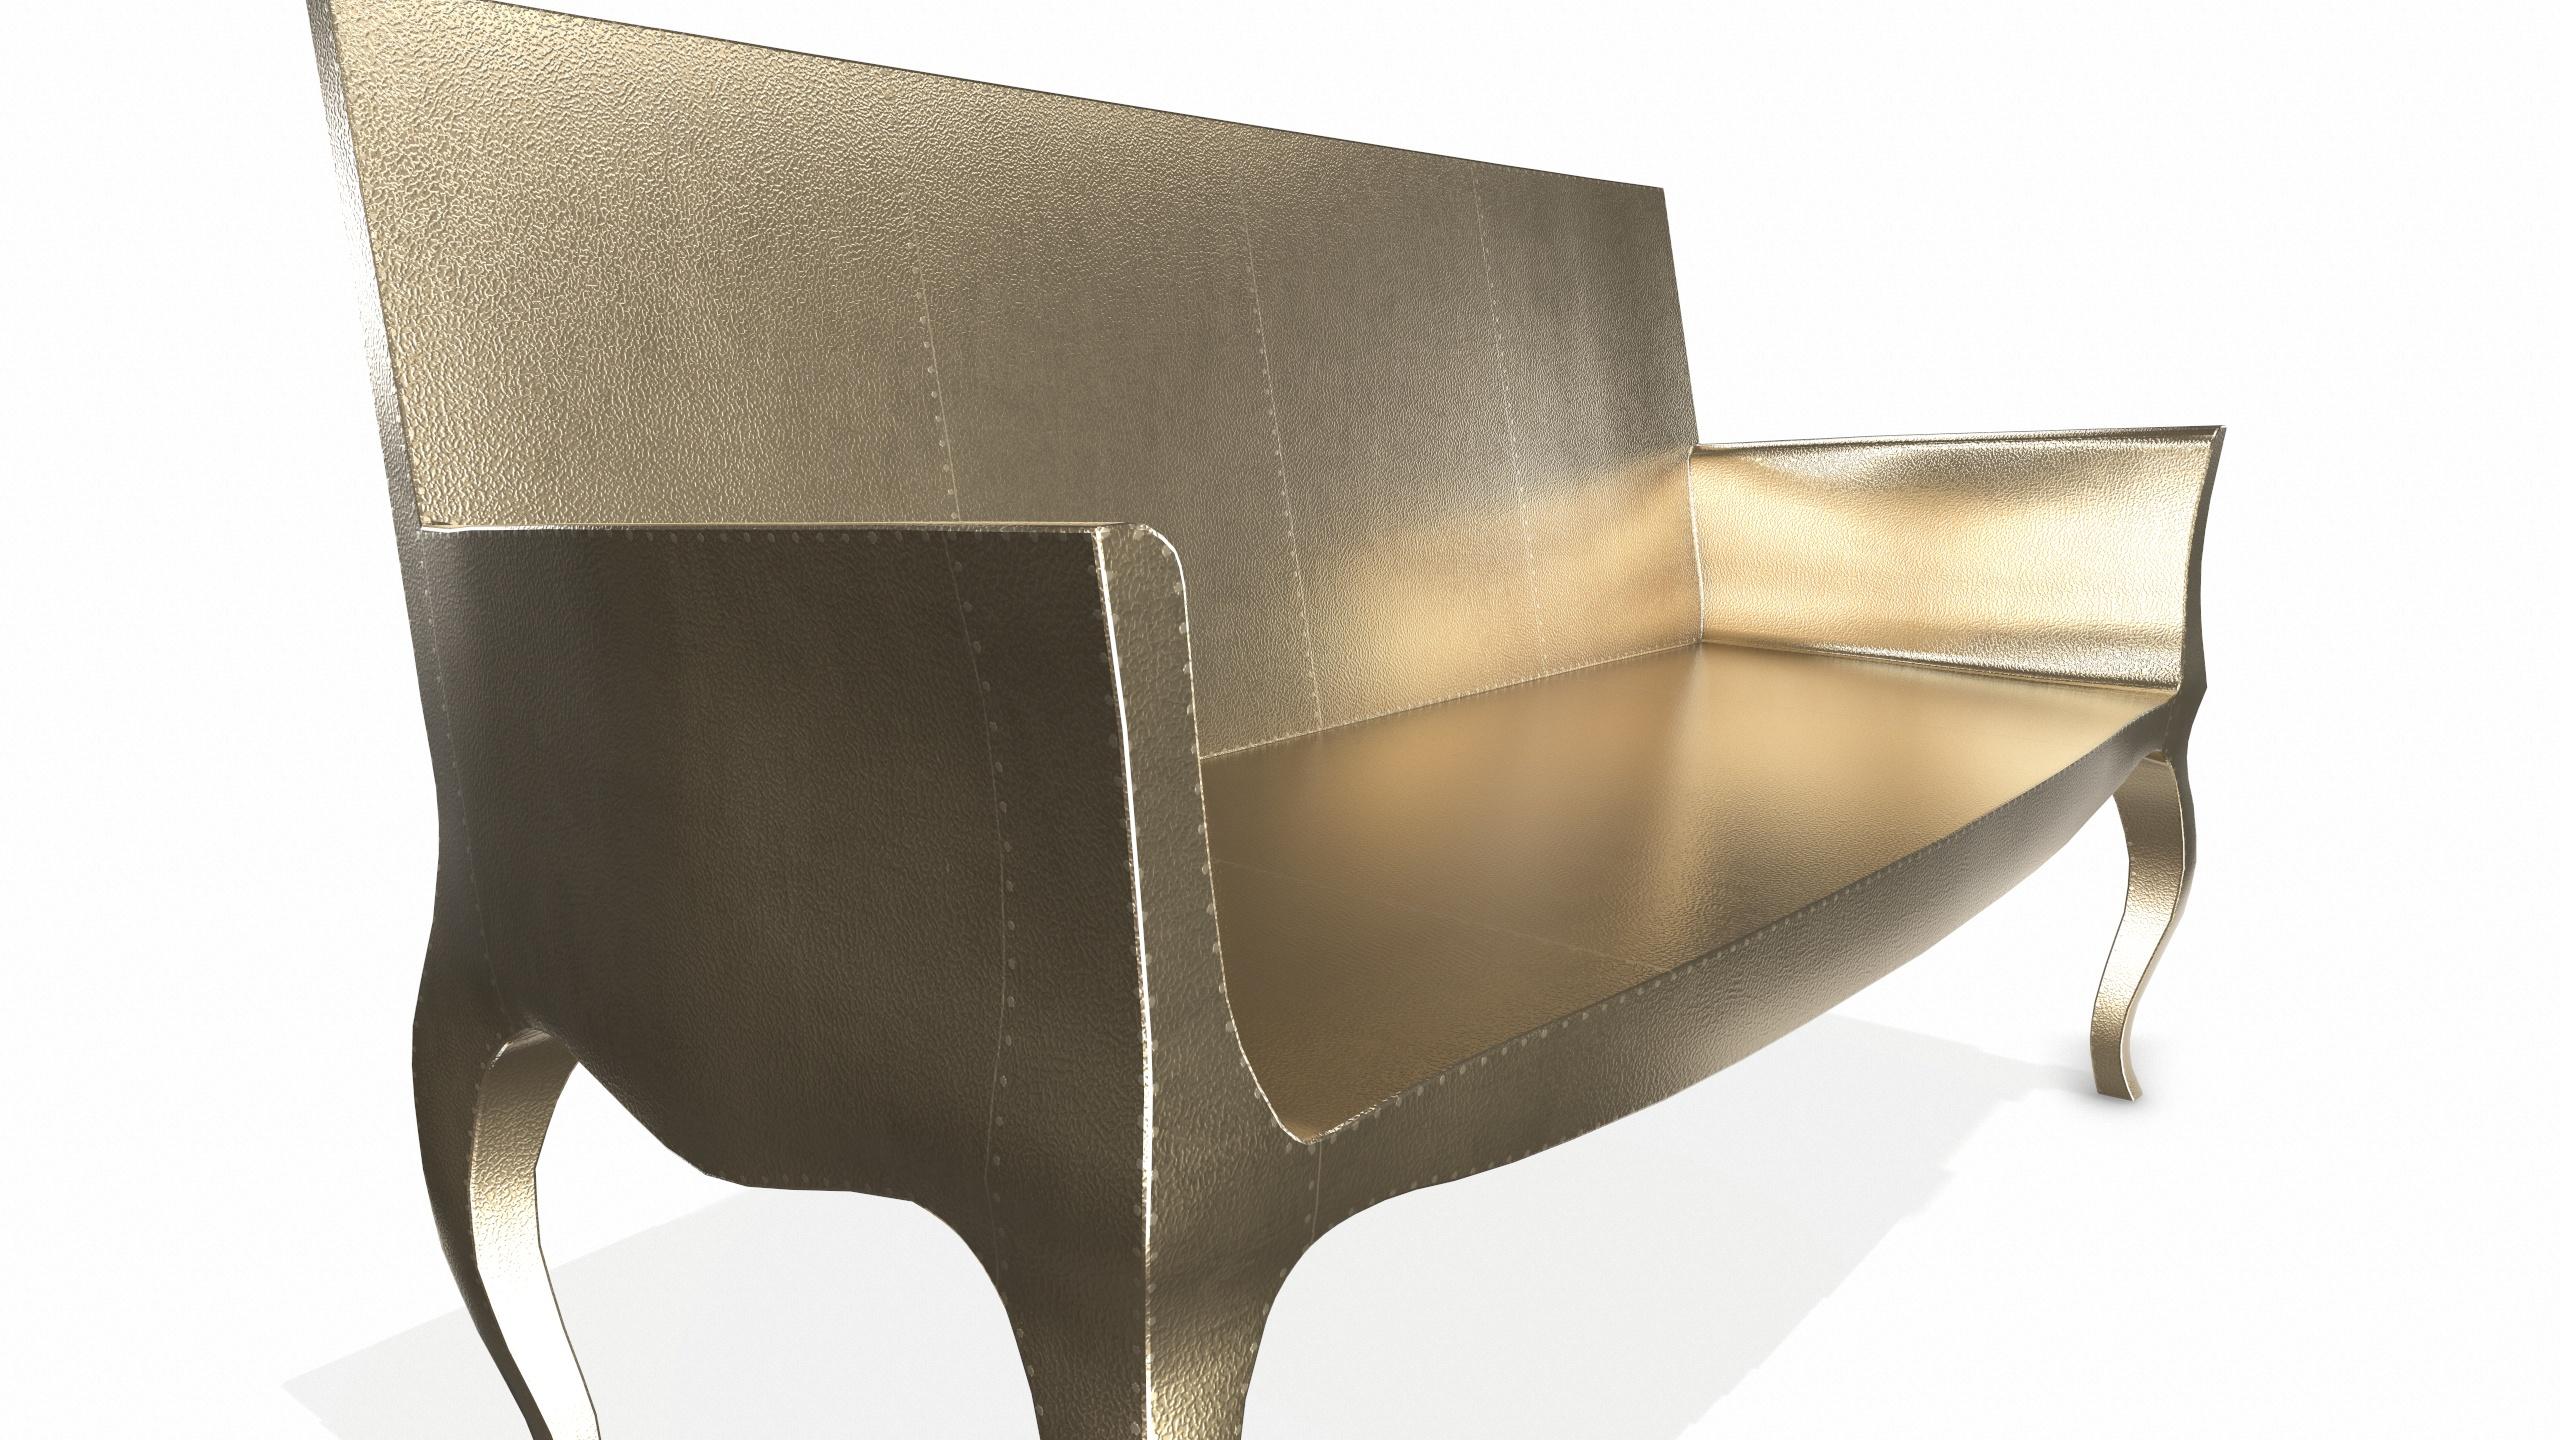 American Louise Settee Art Deco Lounge Chairs in Fine Hammered Brass by Paul Mathieu For Sale